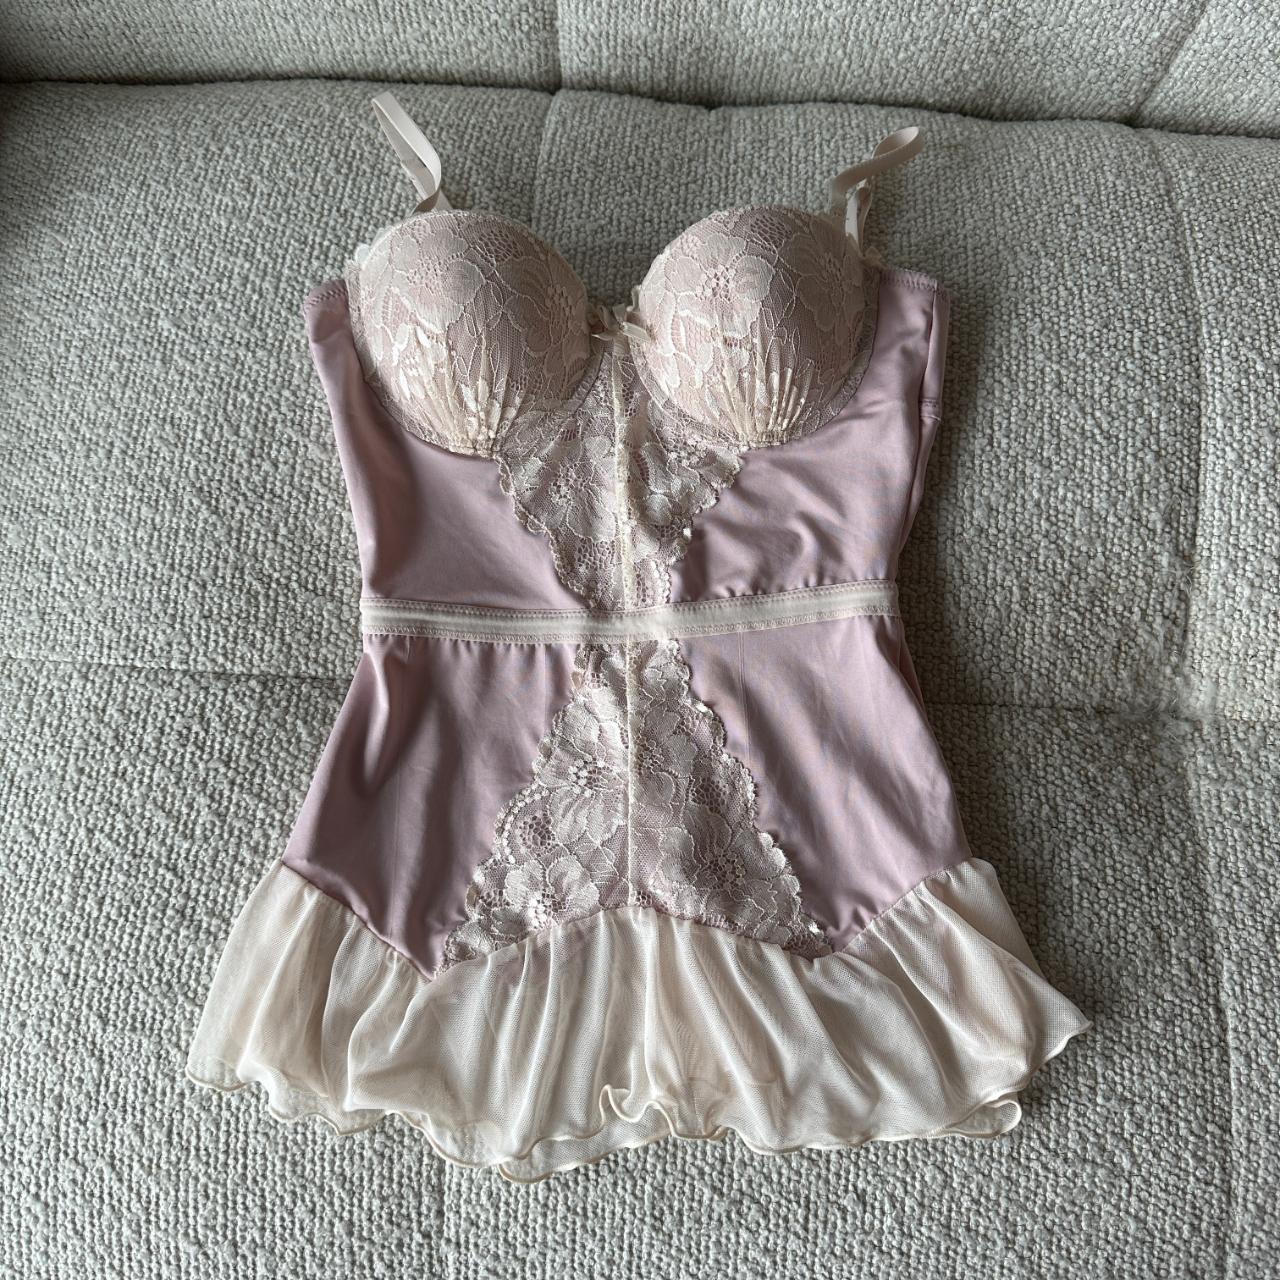 American Vintage Women's Pink and Cream Corset (6)